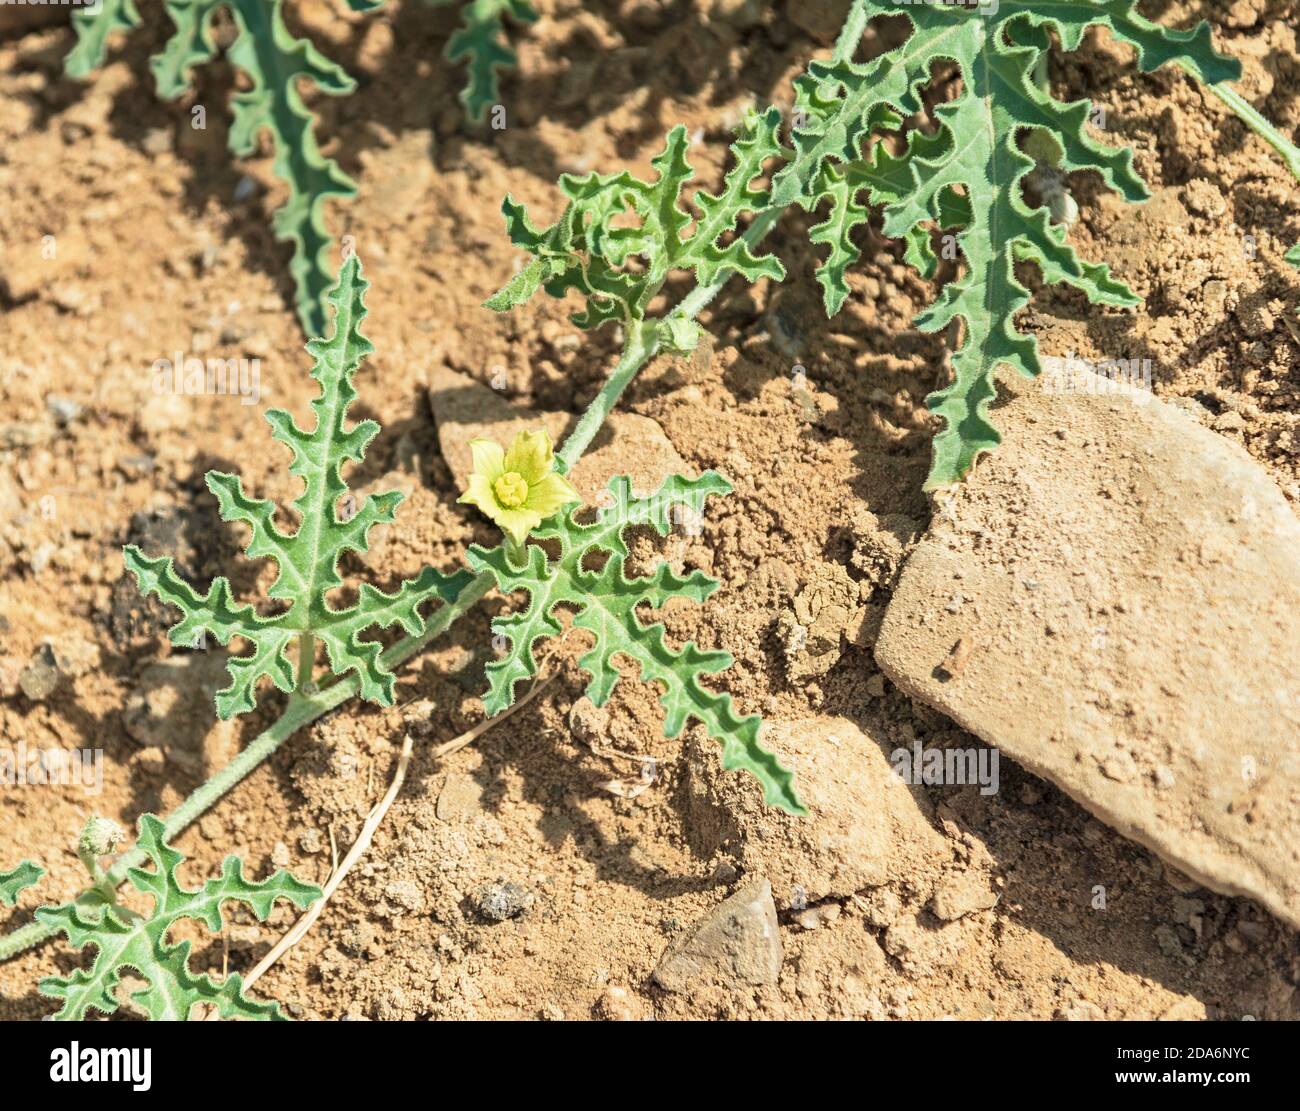 yellow flower of an inedible desert watermelon plant Citrullus colocynthis growing in a sandy stream bed in the makhtesh ramon crater in israel Stock Photo